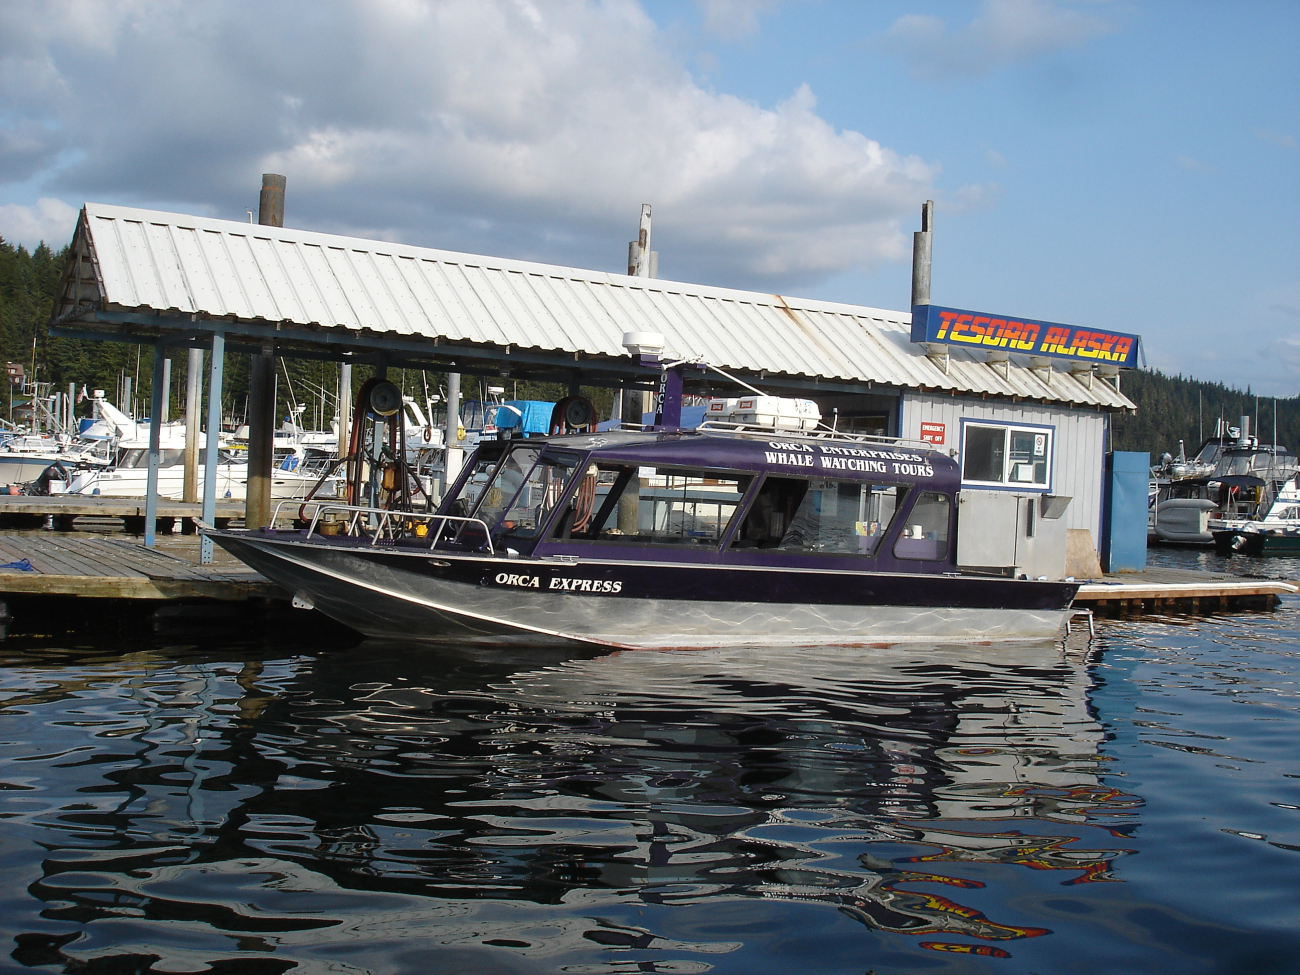 The ORCA EXPRESS, a whale-watching tour boat